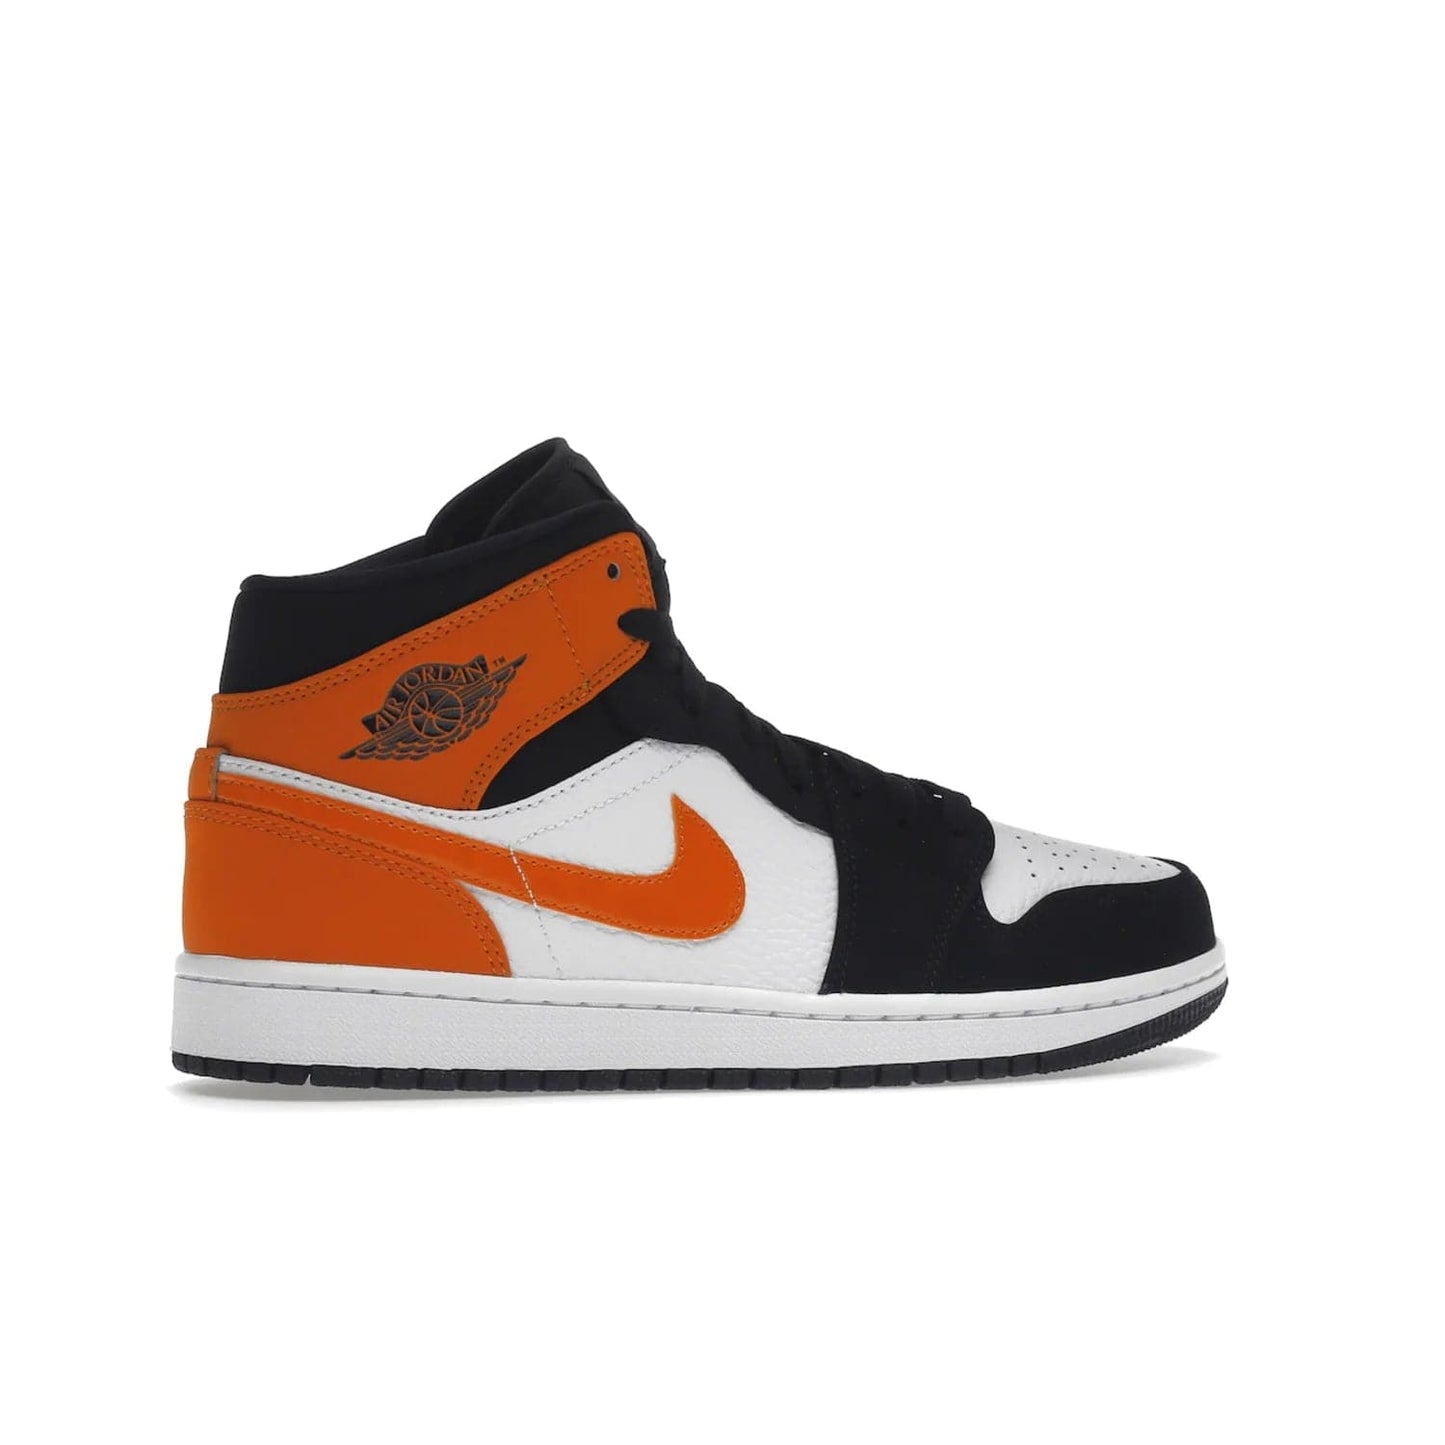 Jordan 1 Mid Shattered Backboard - Image 35 - Only at www.BallersClubKickz.com - The Air Jordan 1 Mid Shattered Backboard offers a timeless Black/White-Starfish colorway. Classic Swoosh logo and AJ insignia plus a shatterd backboard graphic on the insole. Get your pair today!